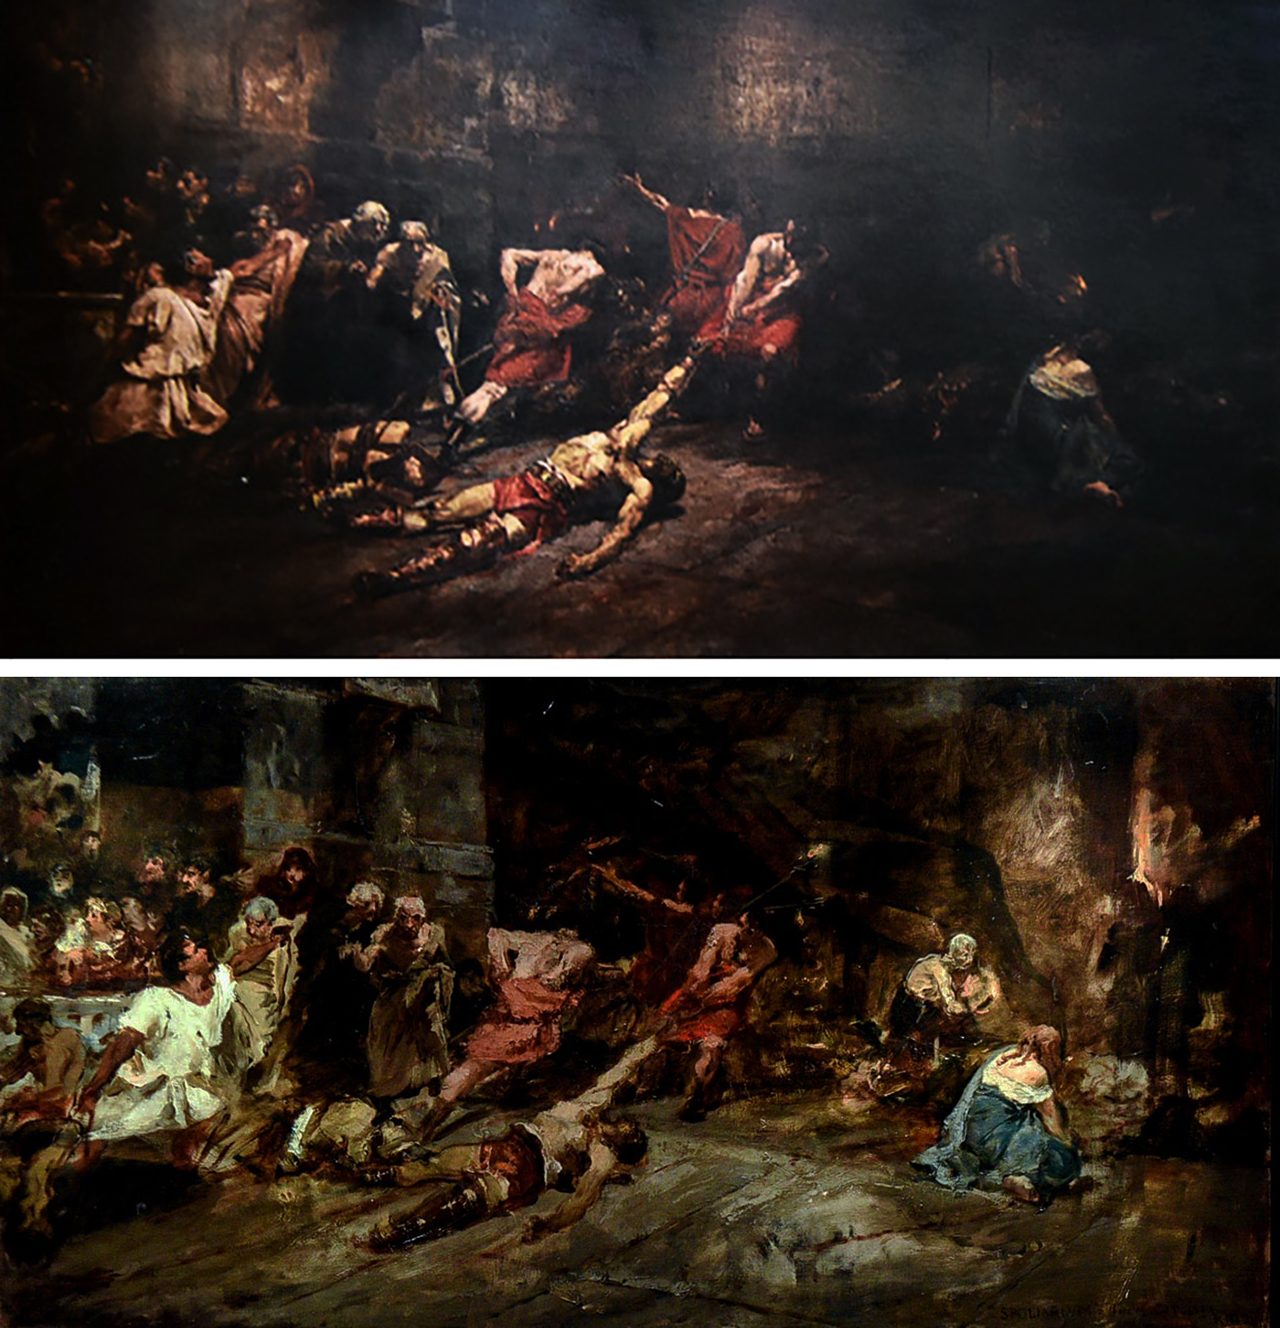  FINAL VS STUDY. The boceto (bottom) appears to be very different stylistically from the finished Spolarium. The source of light in the final painting reinforces the sense of being underground. Darkness plays a key role in the viewer’s experience of space, with its near black corners hemming in the macabre of scene. 